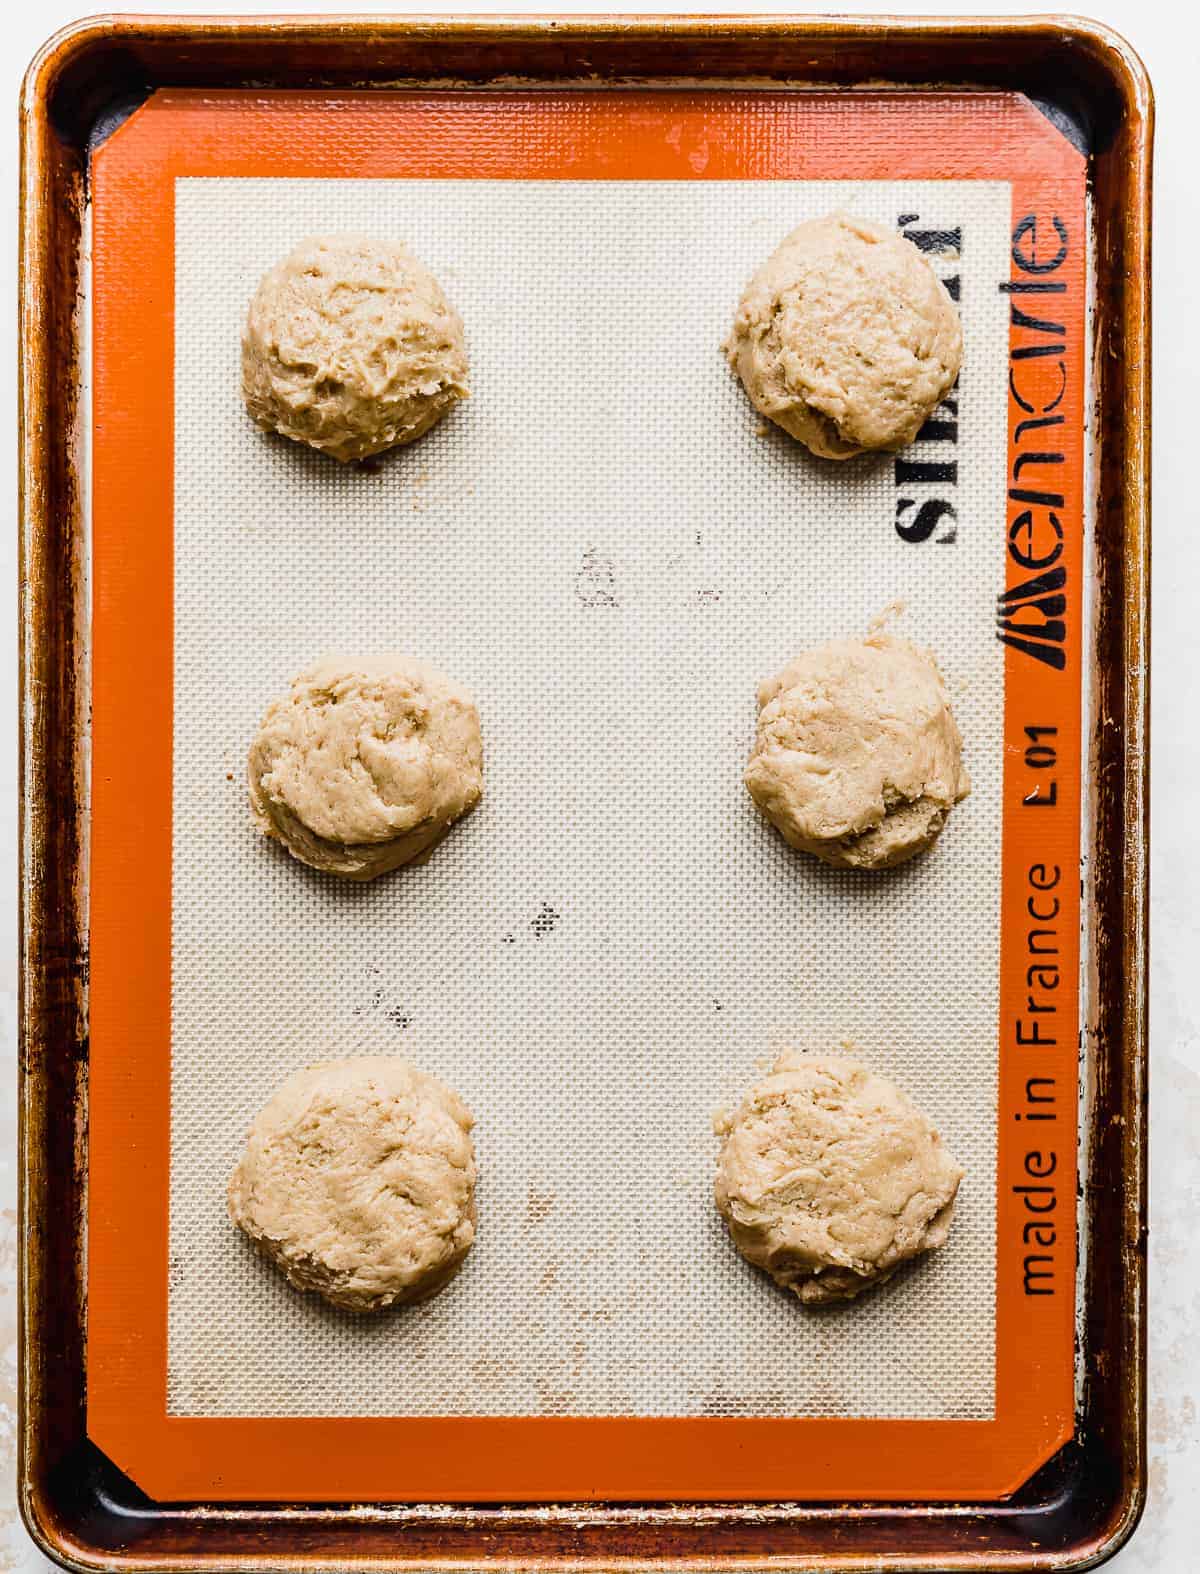 A baking sheet with six unbaked Caramel Apple Cookie dough balls on it.